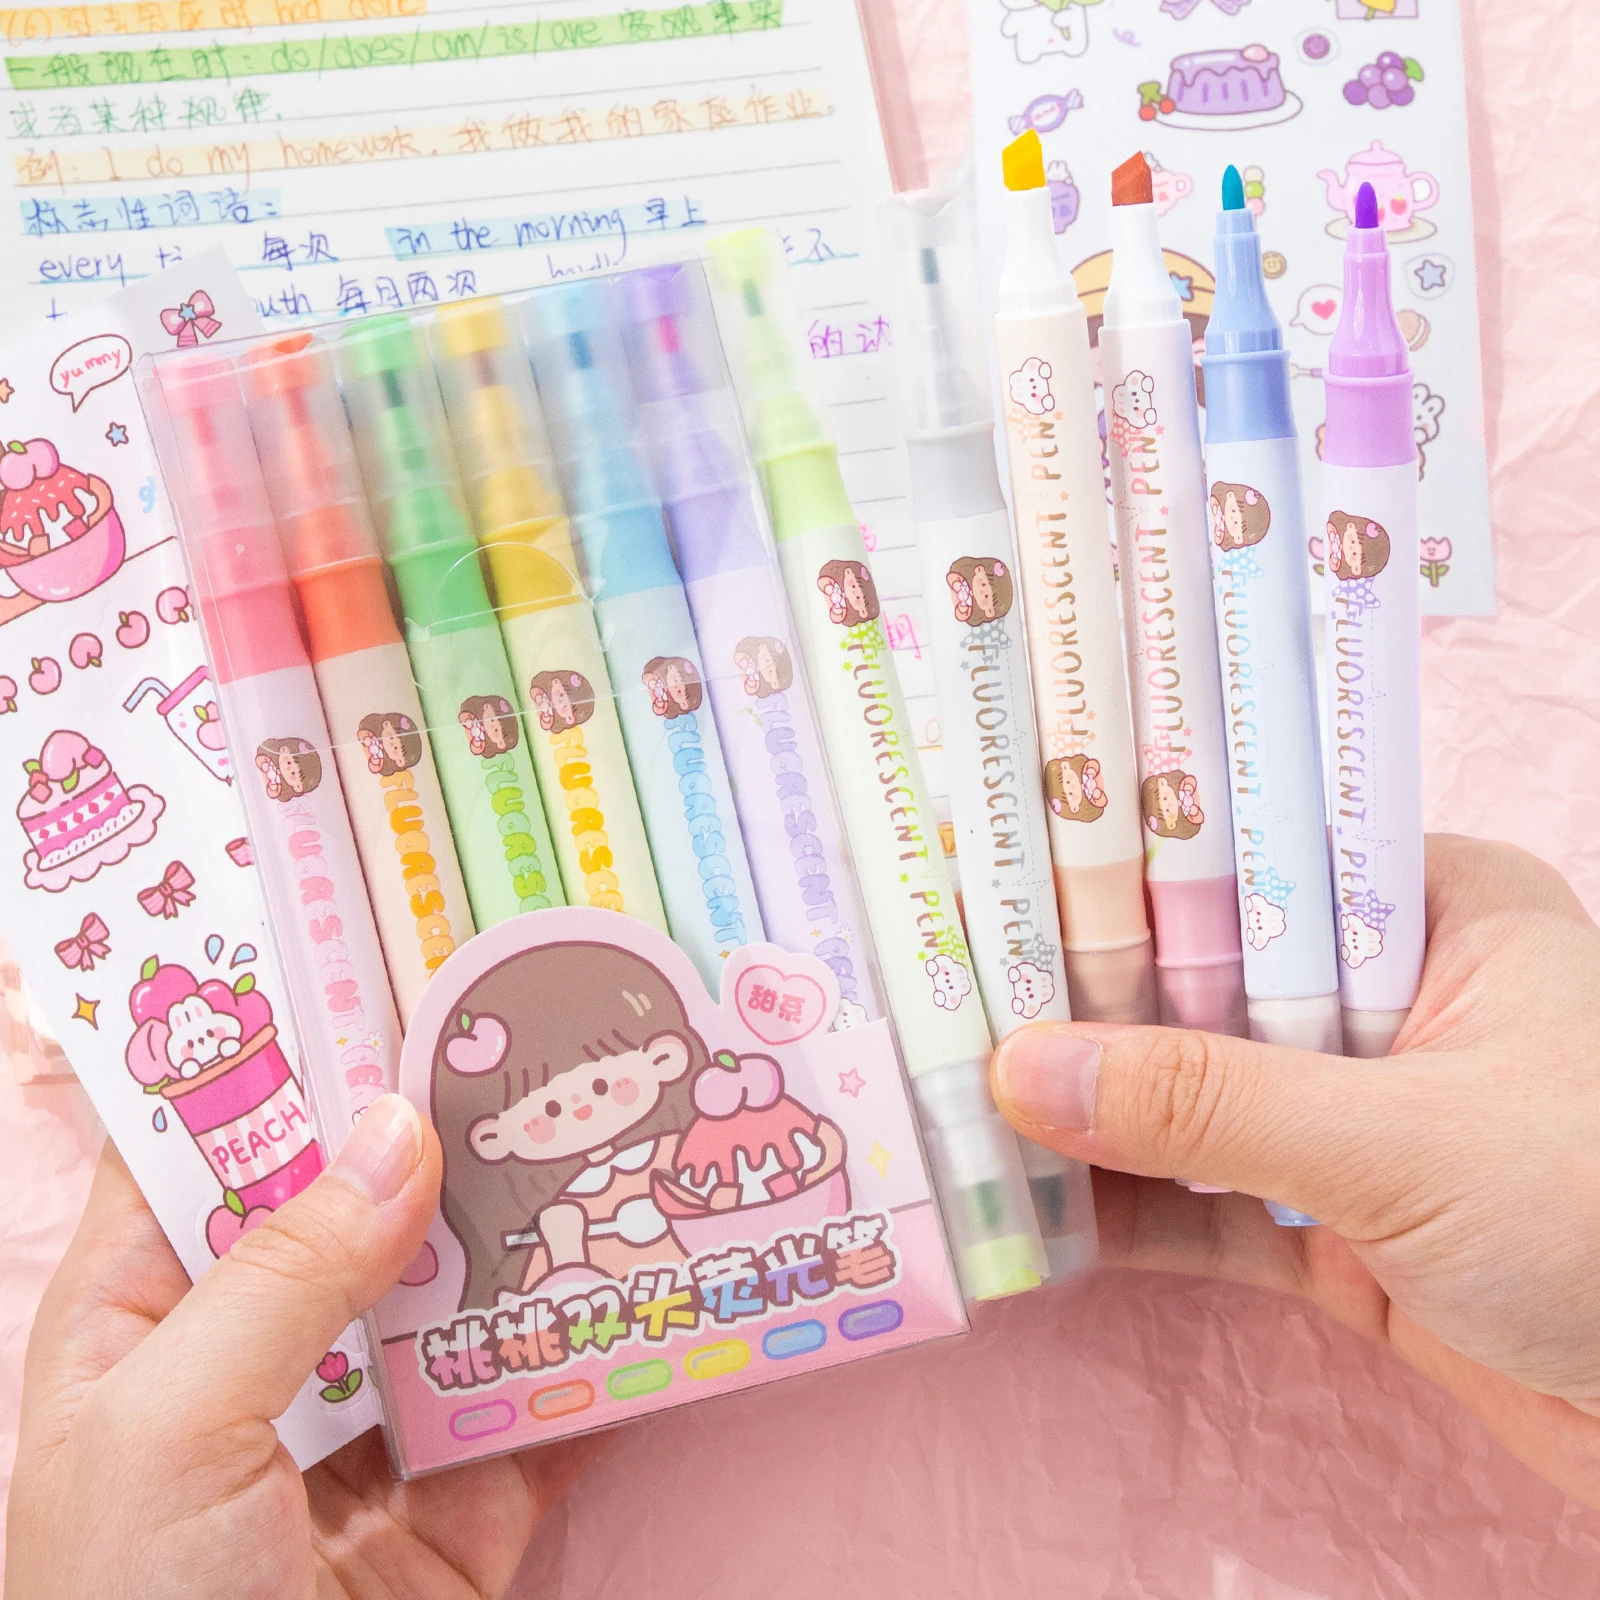 6PCS Pastel Highlighters Fluorescent Pen School Stationery Kawaiii office Supplies Marker Pens Colored Markers Cute Drawing Pens 24 pcs creative simple colored neutral water pens 0 5mm double bead gel pen head sweet press 6 color marking learning supplies